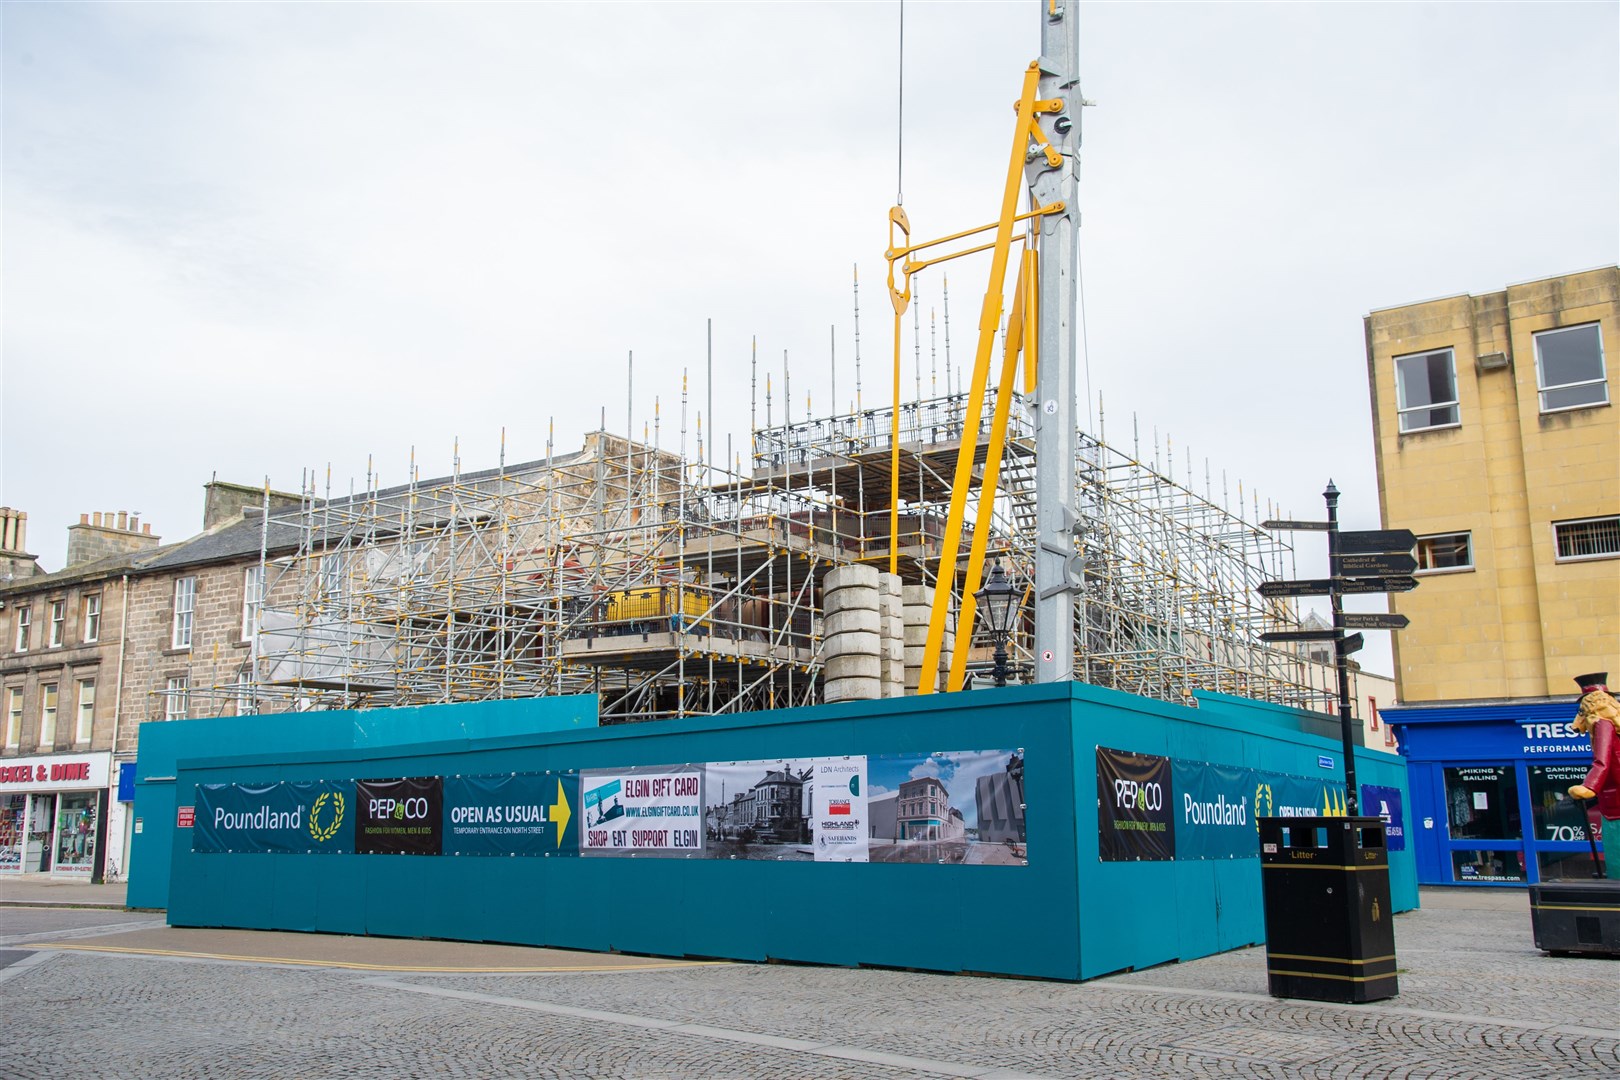 The restoration of the Elgin Poundland building continues. Picture: Daniel Forsyth